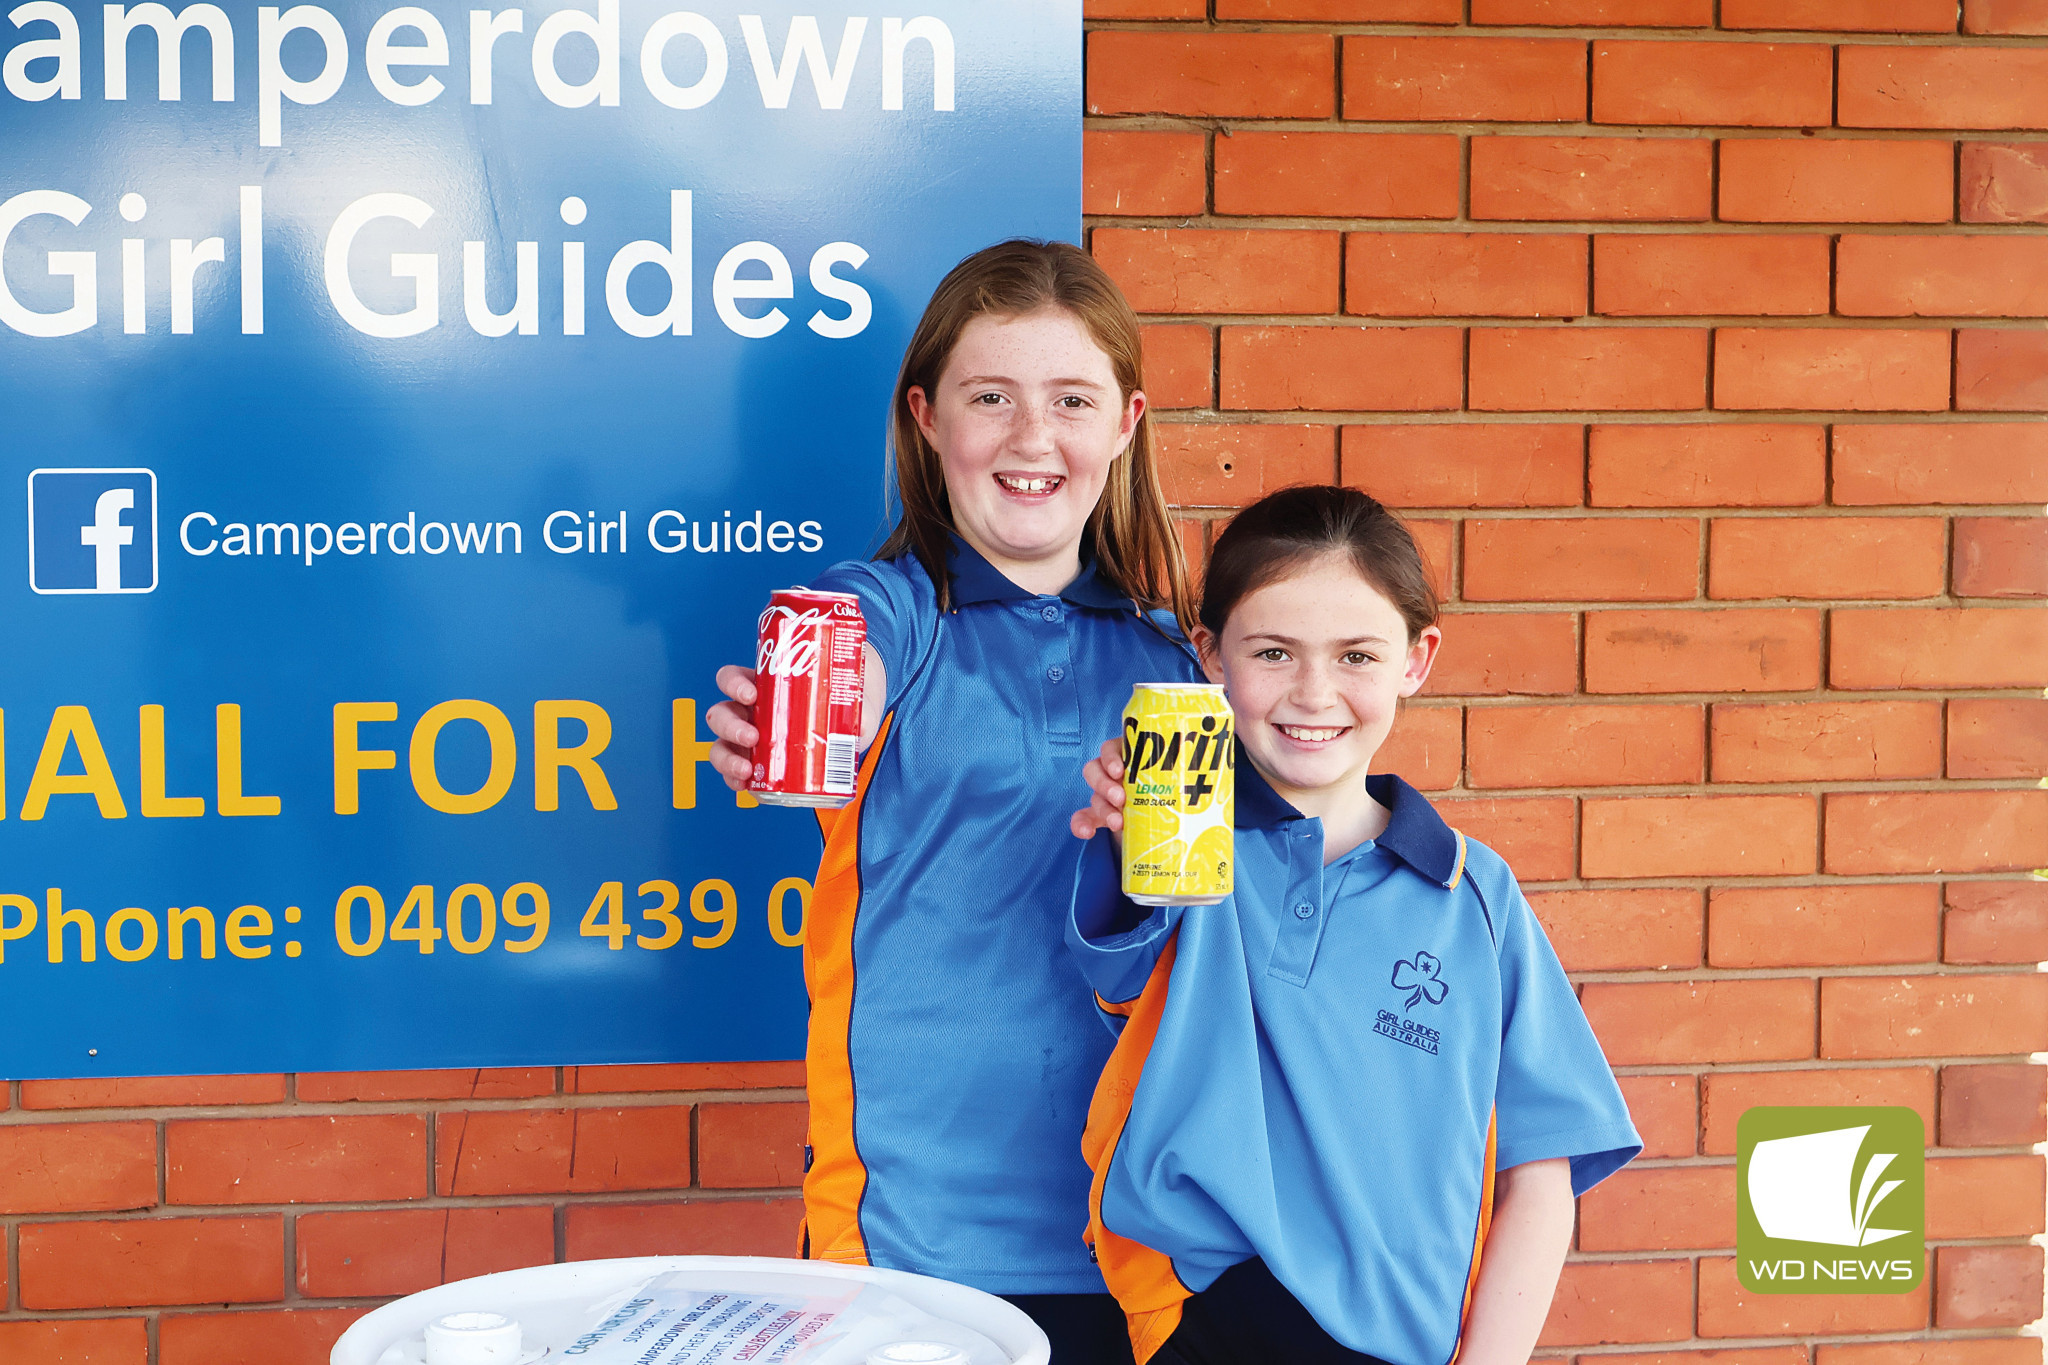 Cash for cans: Camperdown Girl Guides Grace and Olivia Barber are encouraging residents to collect their empty bottles and cans and give them to the group to help raise funds to run the hall.